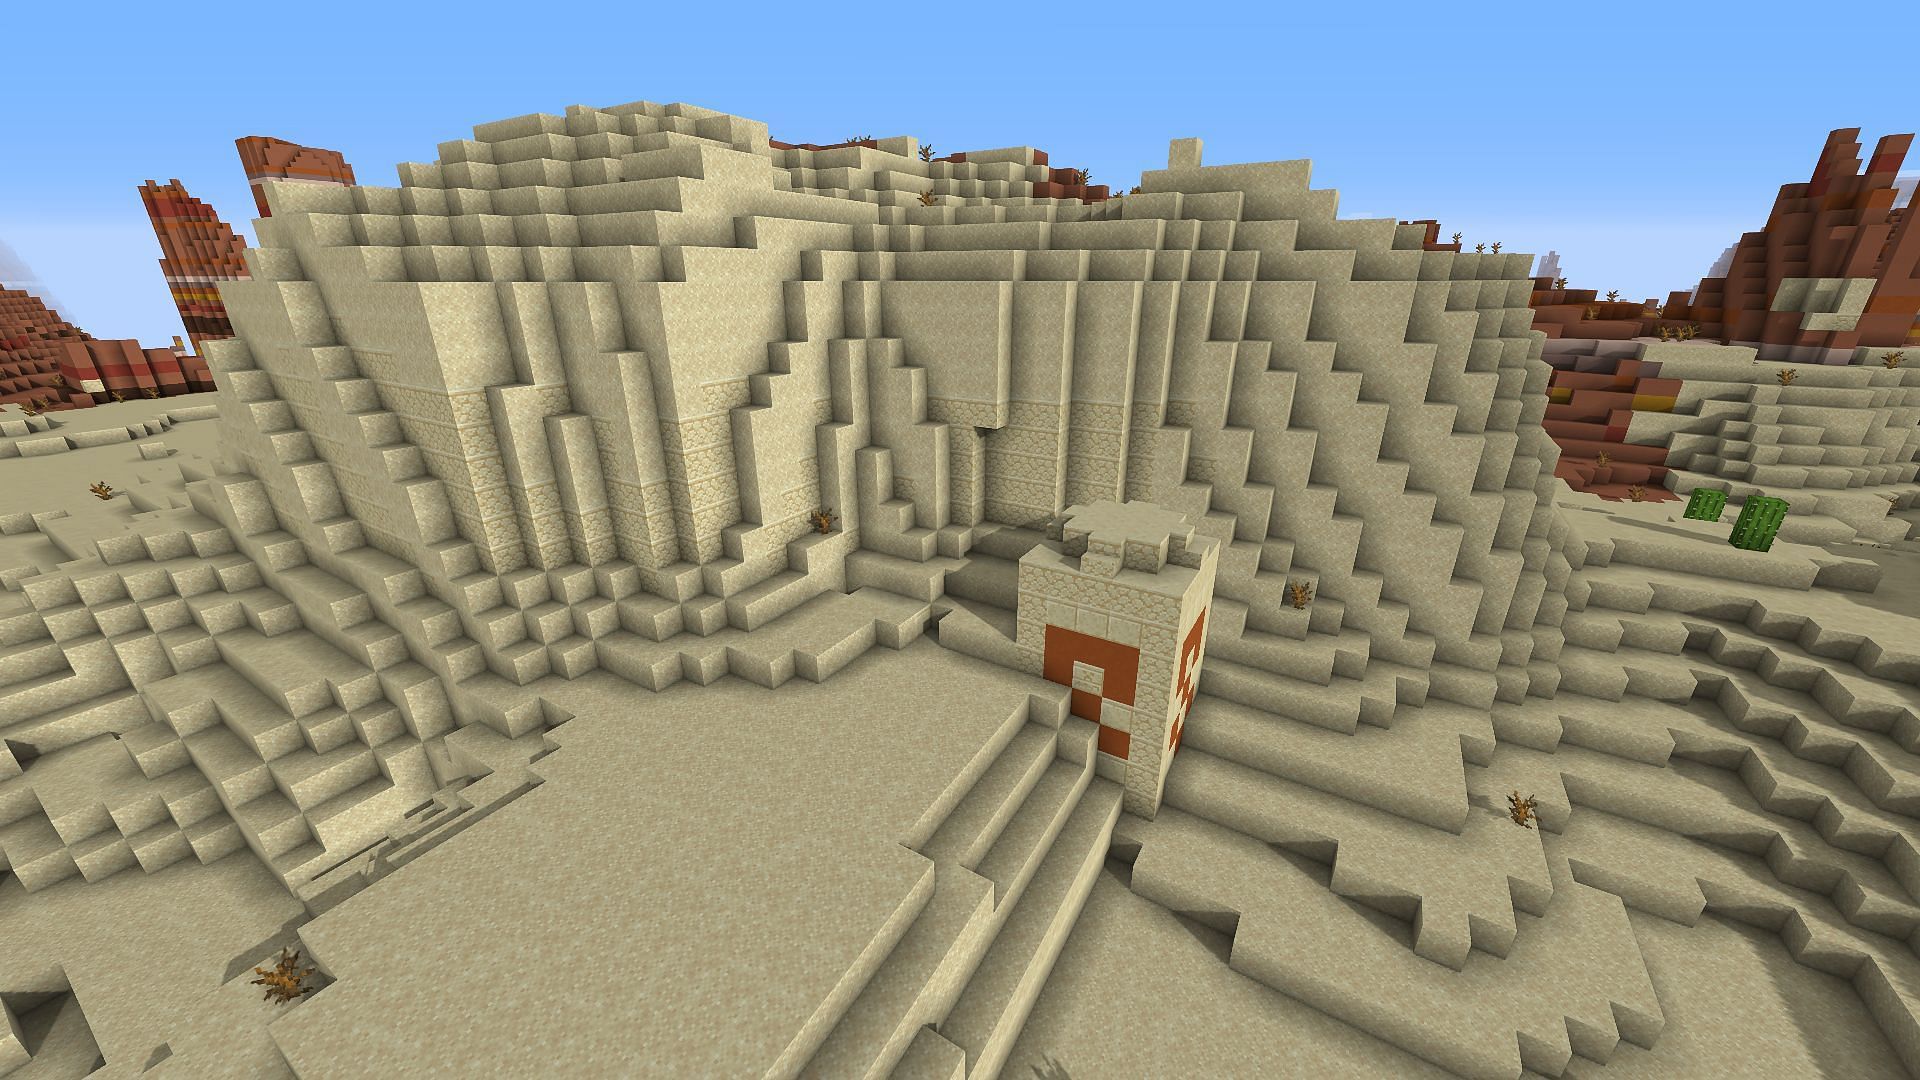 The mostly buried desert temple the seed contains (Image via Minecraft)